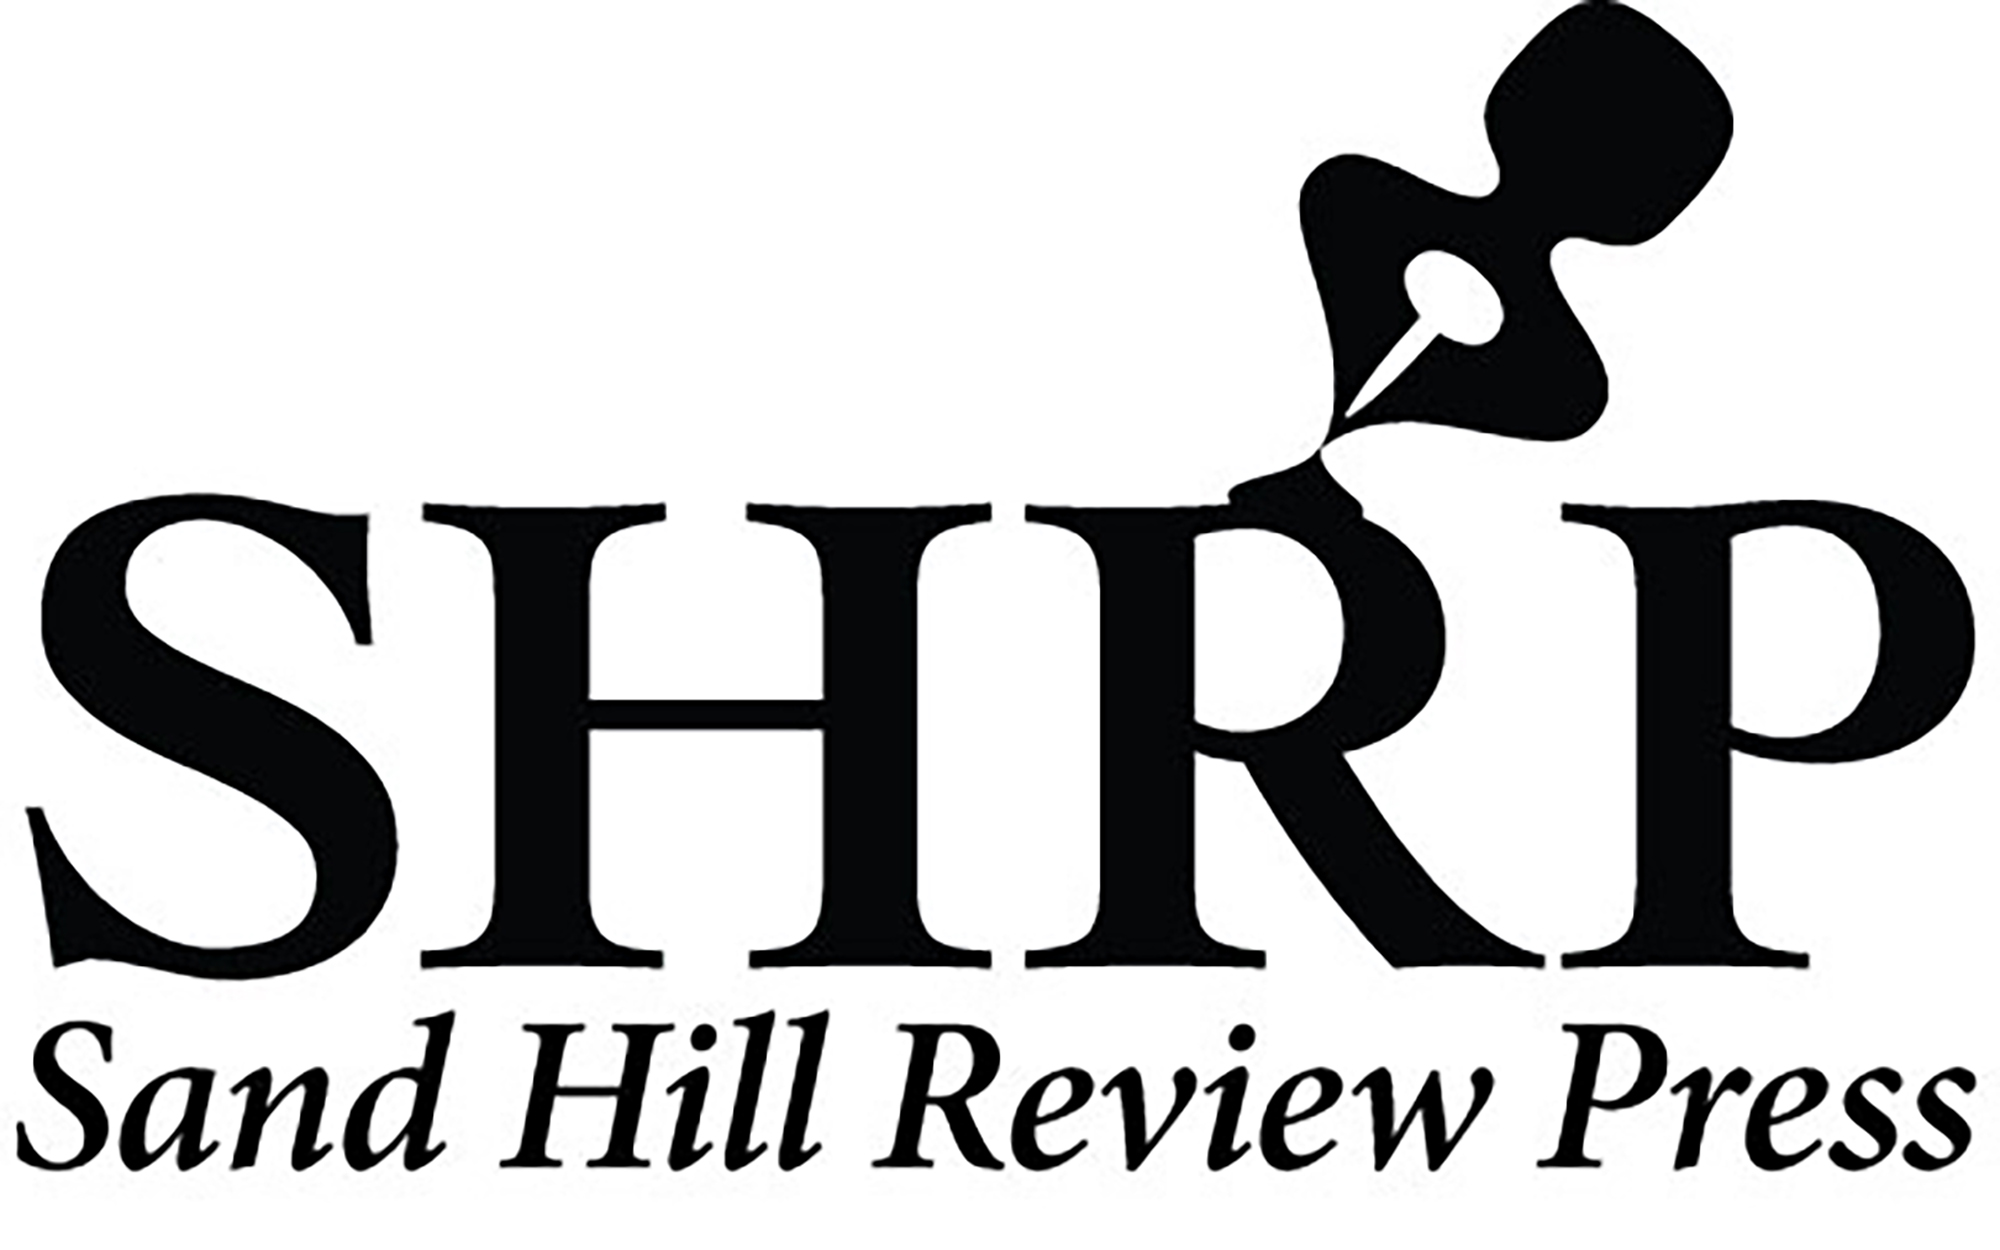 Sand Hill Review Press Catalog